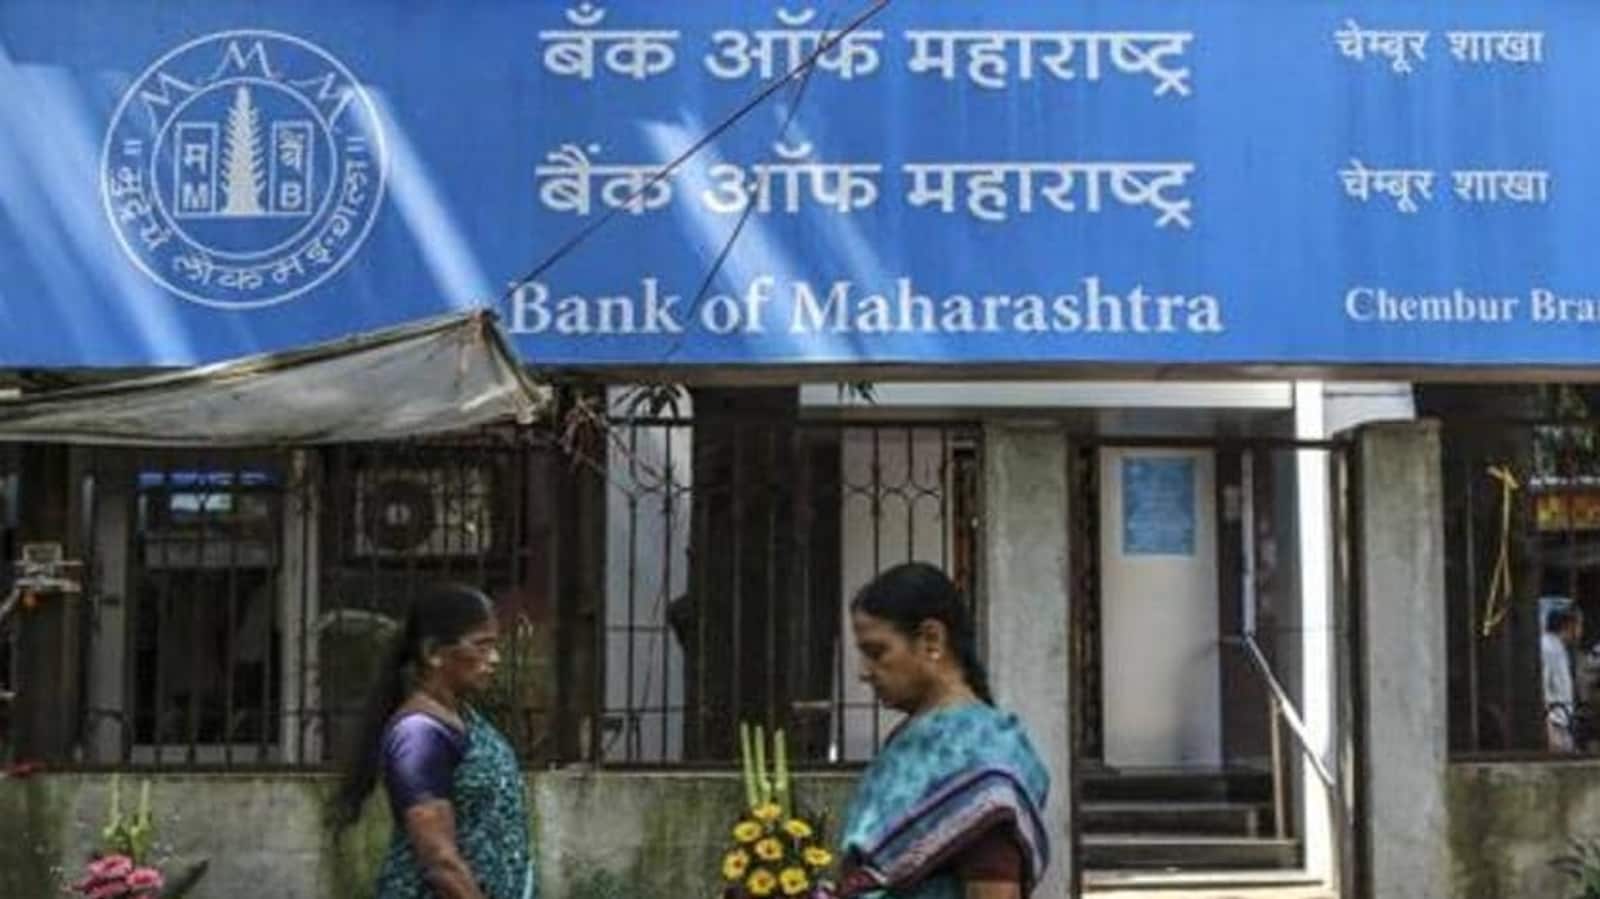 Bank of Maharashtra goes live on new direct tax collection system